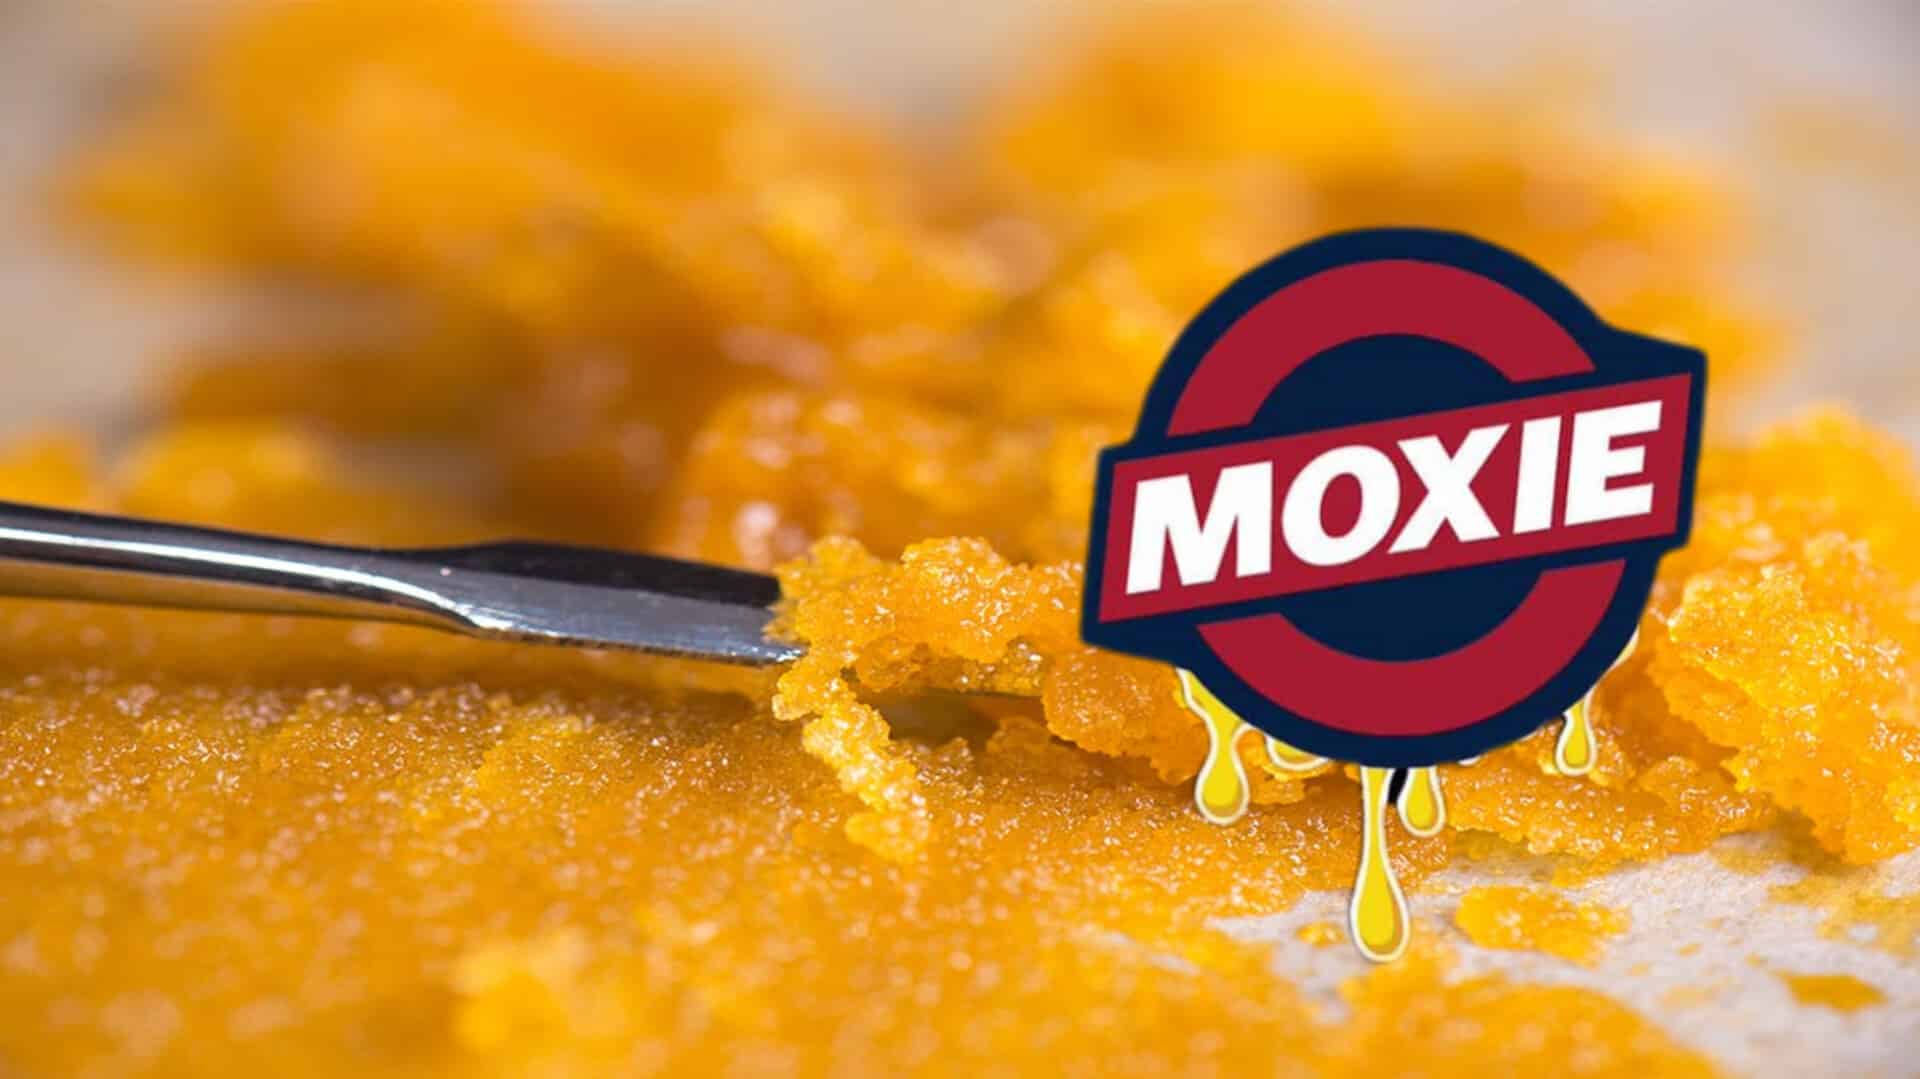 Moxie: A California Legacy With a History of Quality